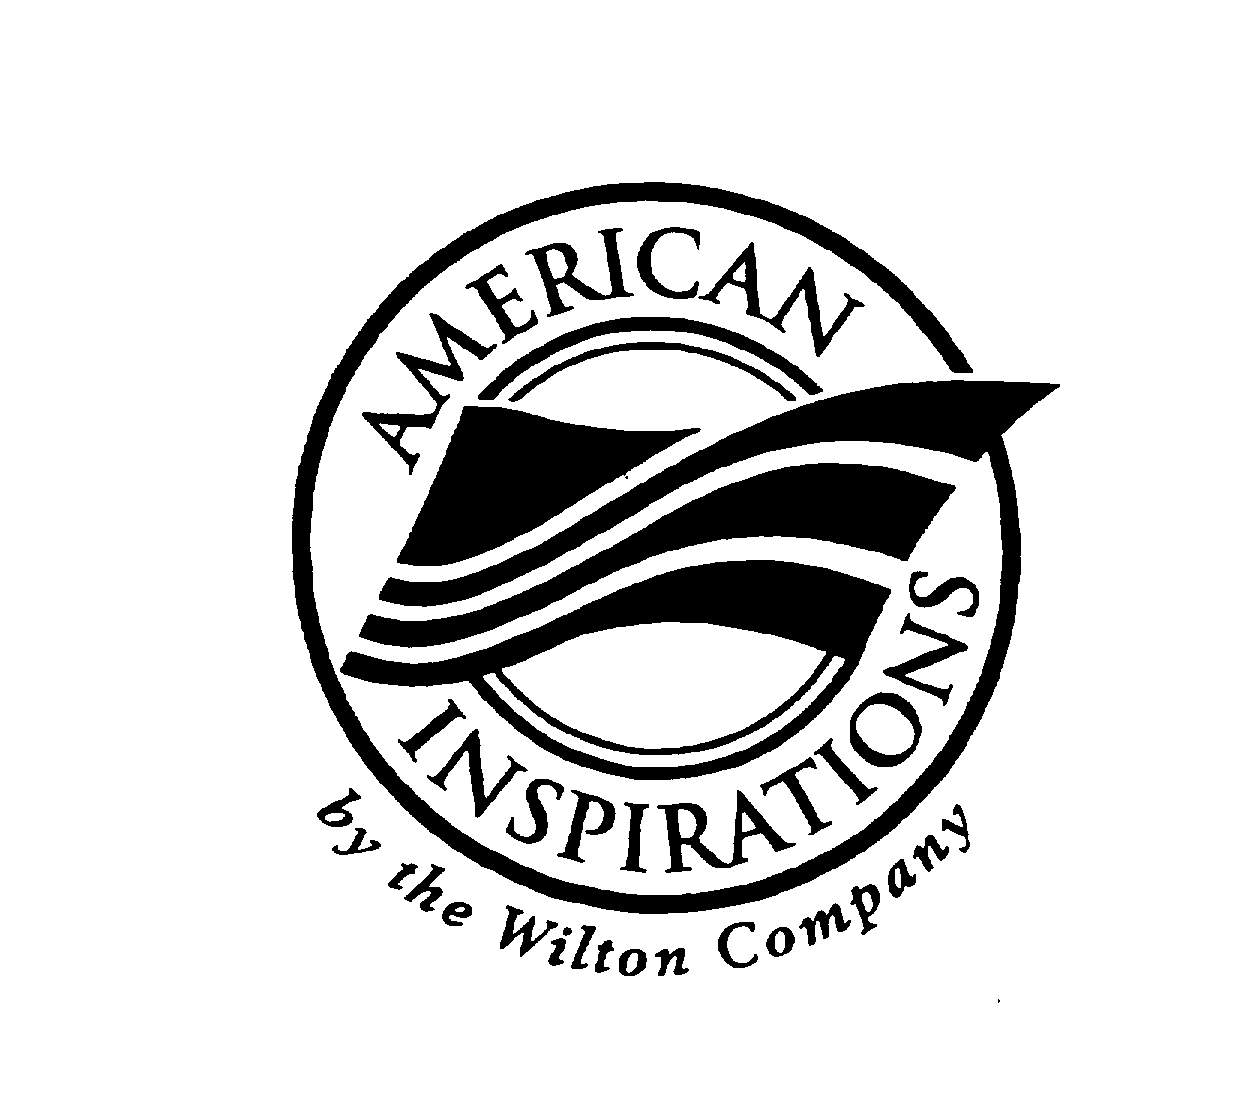  AMERICAN INSPIRATIONS BY THE WILTON COMPANY